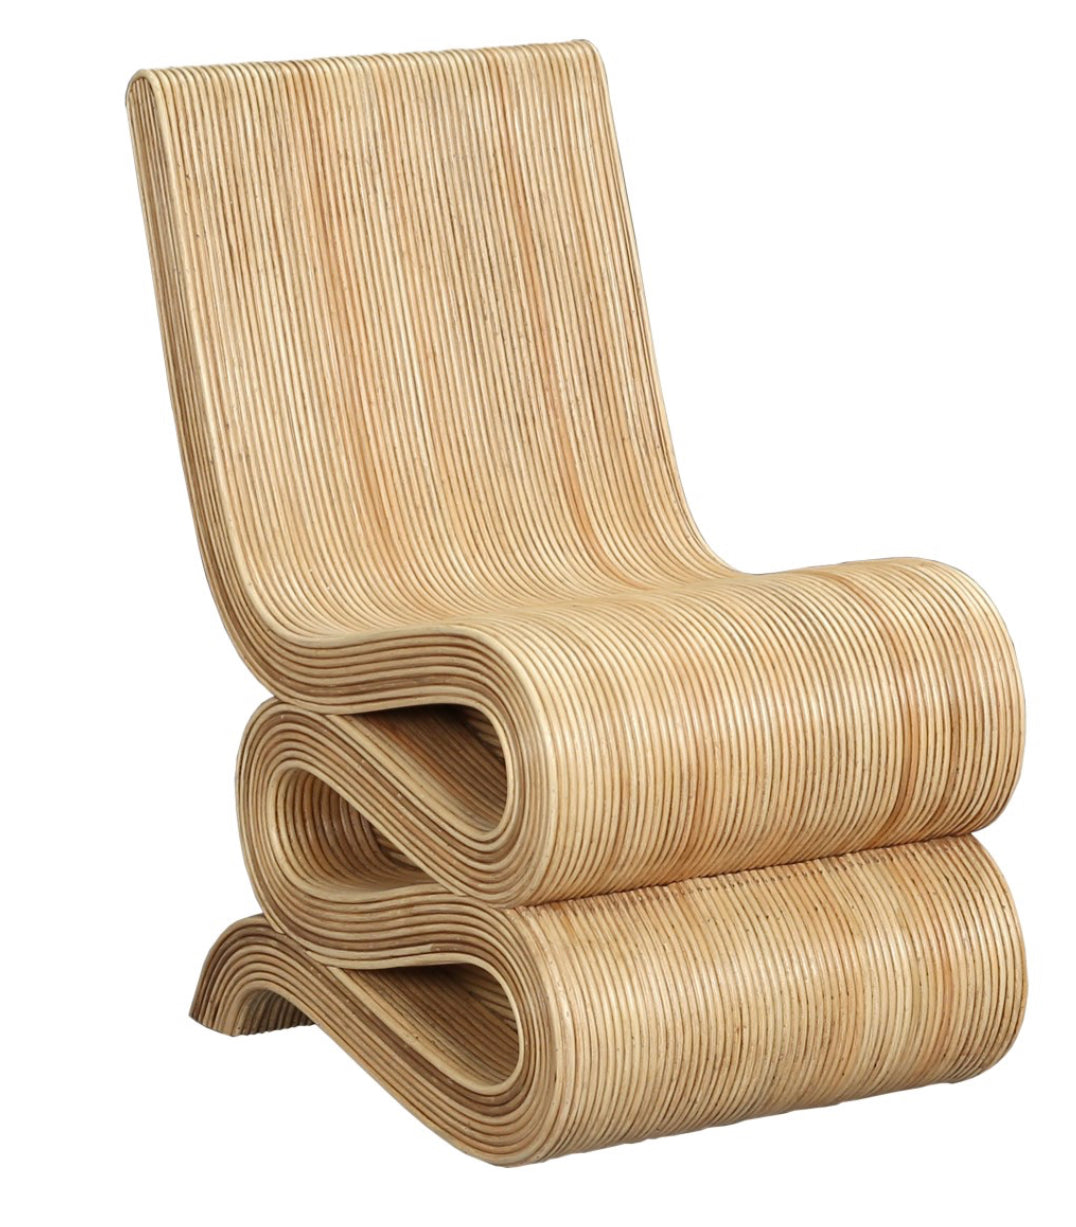 The Ribbon Chair is made from rows of single rattan rods that bend and fold to create a sculptural chair.  The material, which is not for outdoor use, is sustainable and durable materal and will last for generations when cared for properly.  Depth2 xHeight34 x Width18.5 Weight36.